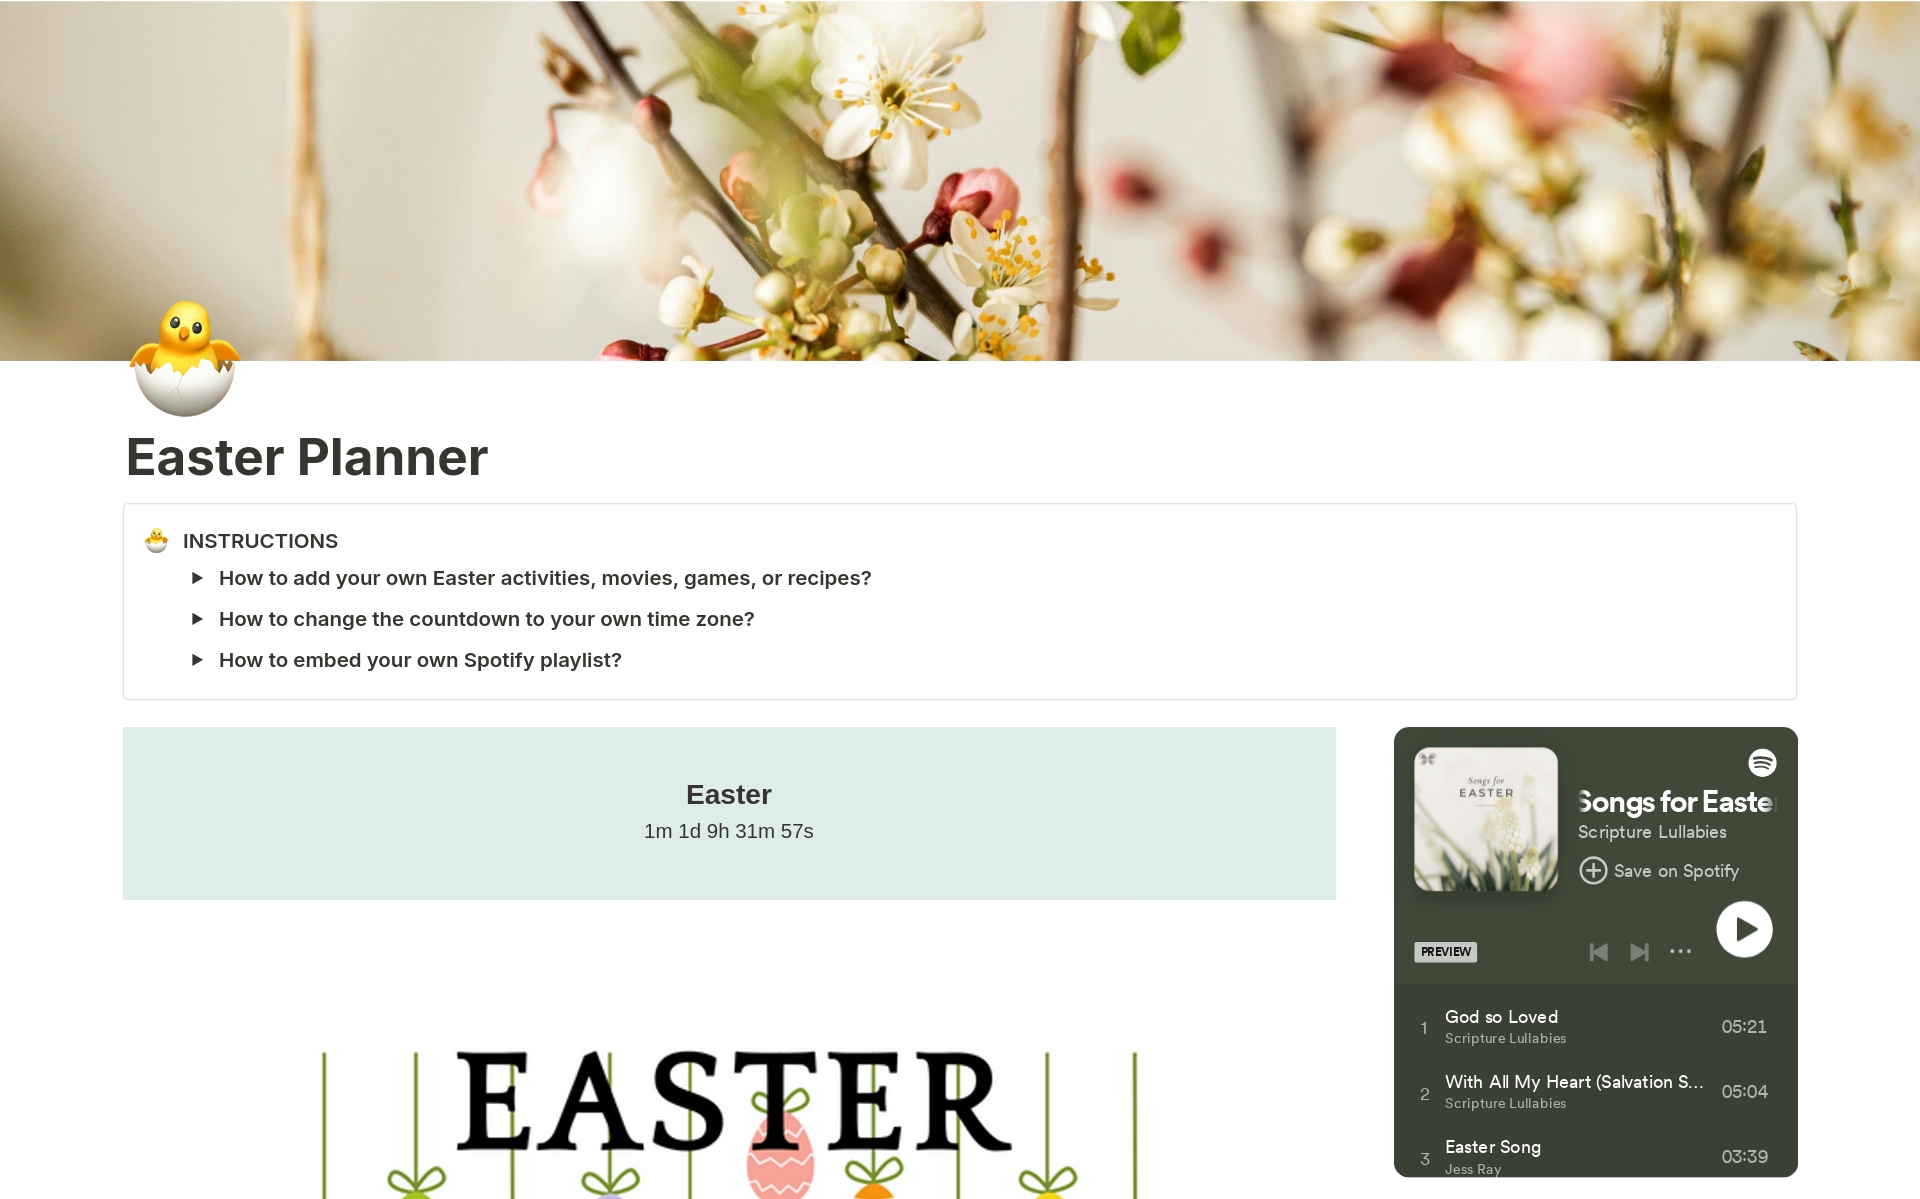 Are you ready to make this Easter egg-stra special? Dive into the ultimate Easter planning experience with our meticulously crafted Easter Planner template. Unleash the full potential of your festivities with a seamless blend of recipes, activities, and festive magic.